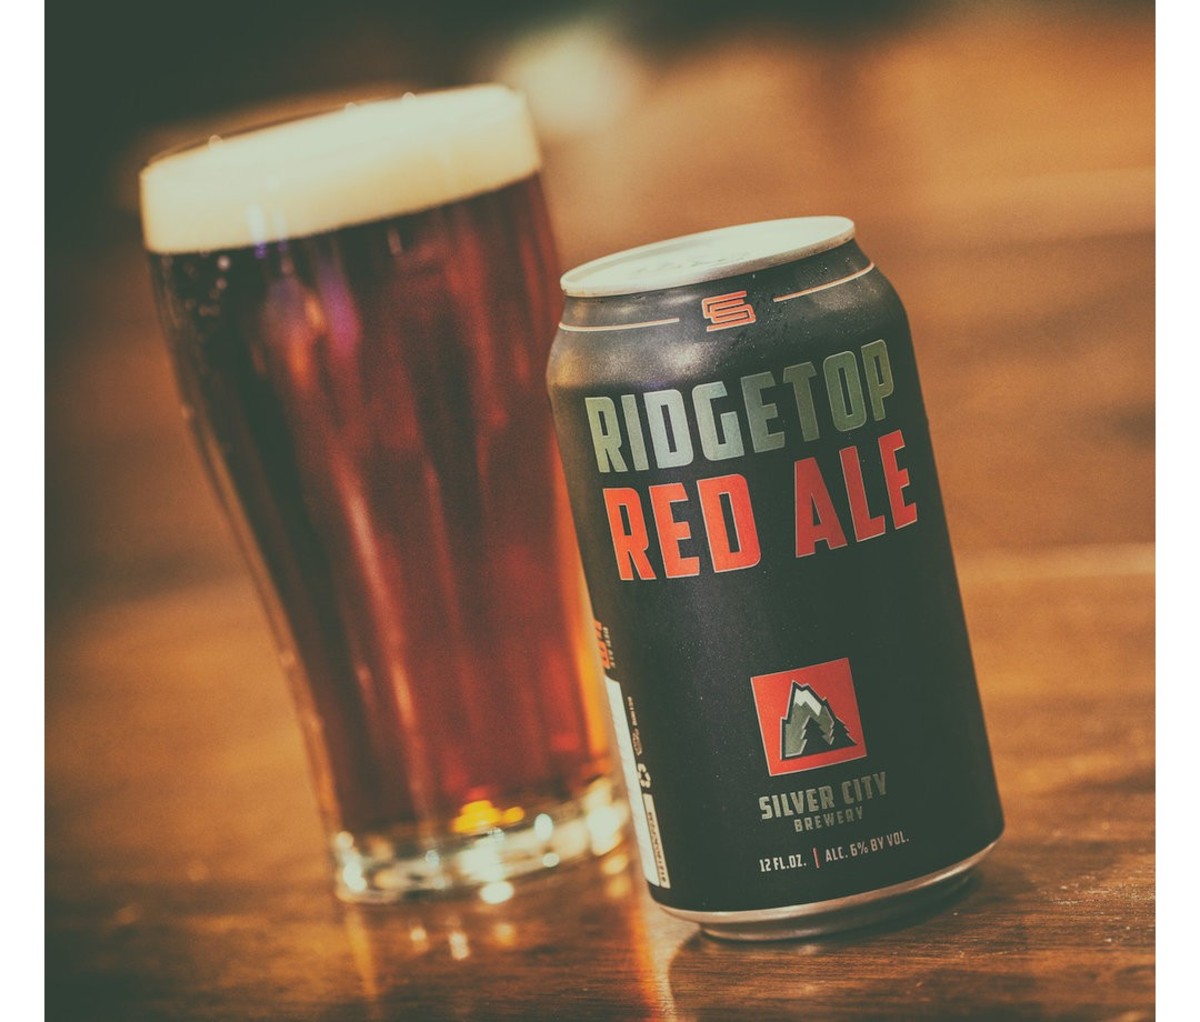 Filled pint glass and can of Silver City Ridgetop Red beer on a wooden table